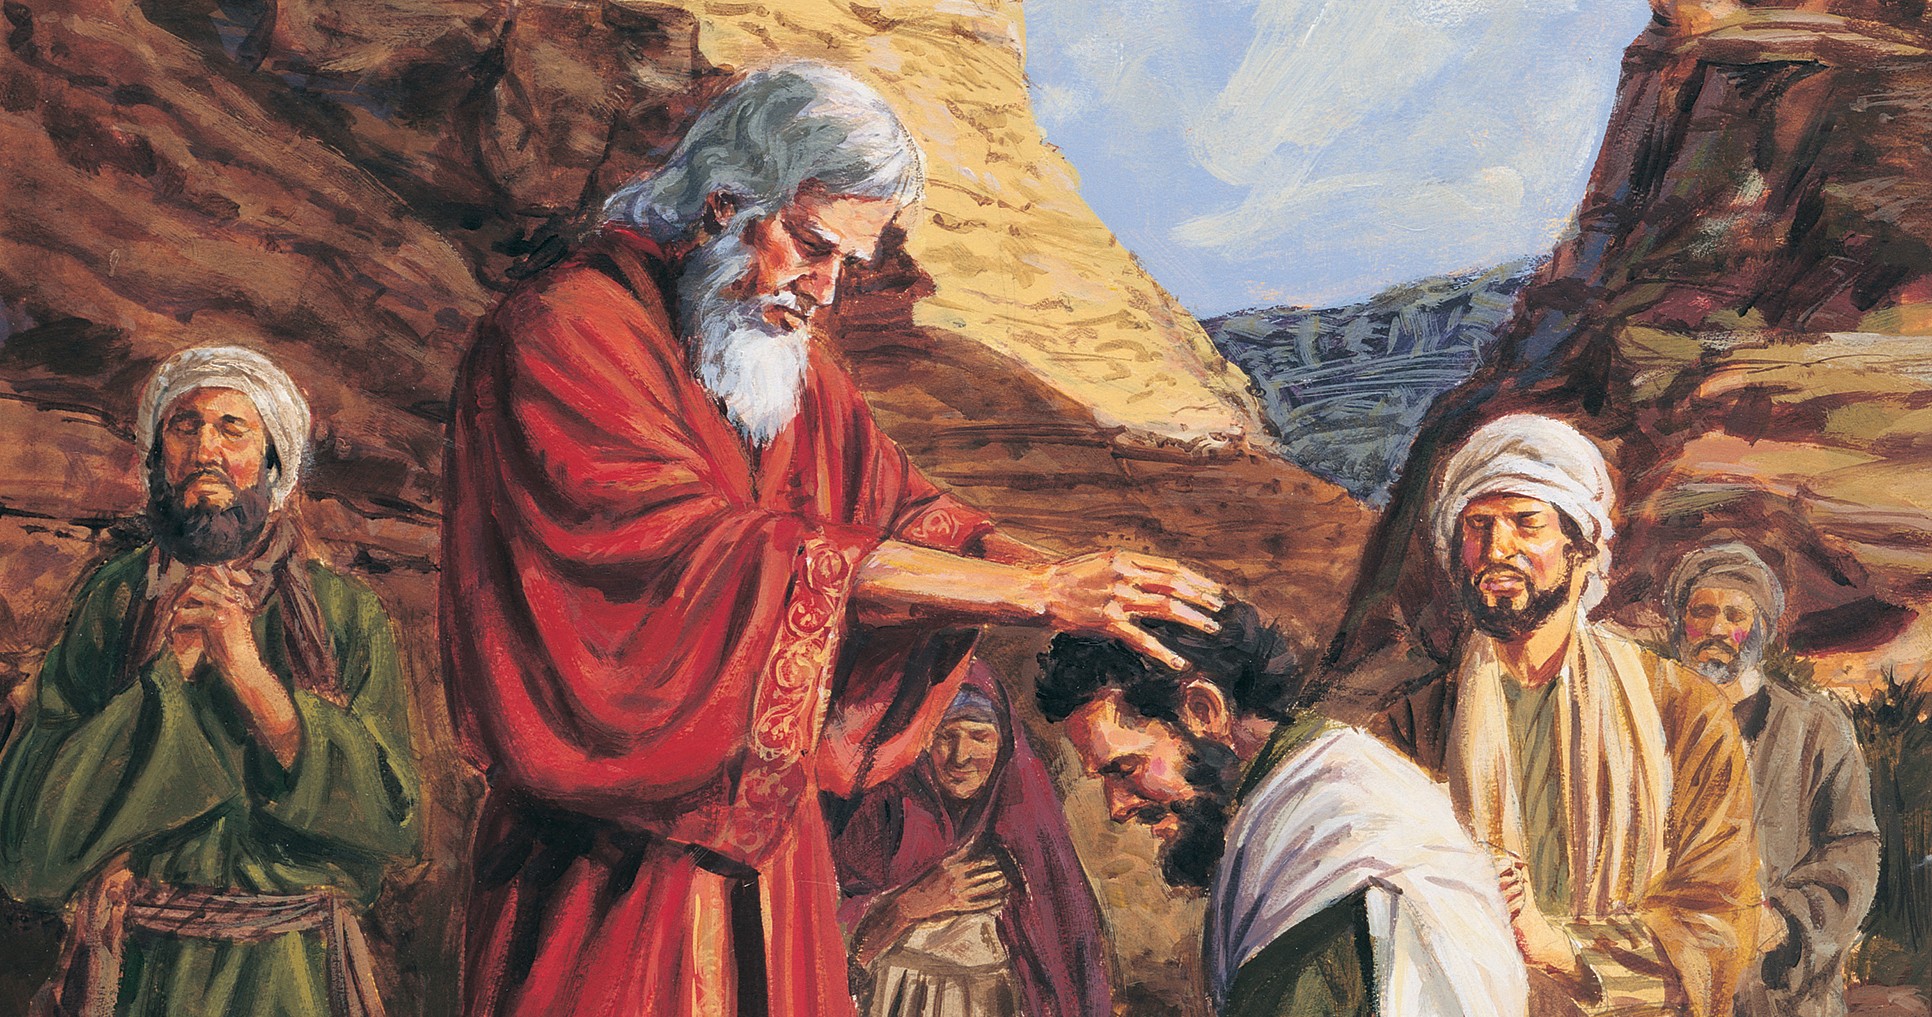 The Old Testament prophet Moses ordaining Joshua to lead the Israelites.  Joshua is kneeling before Moses.  Moses has his hands on the head of Joshua.  A group of men and women are gathered around Moses and Joshua watching.  A desert landscape is in the background.